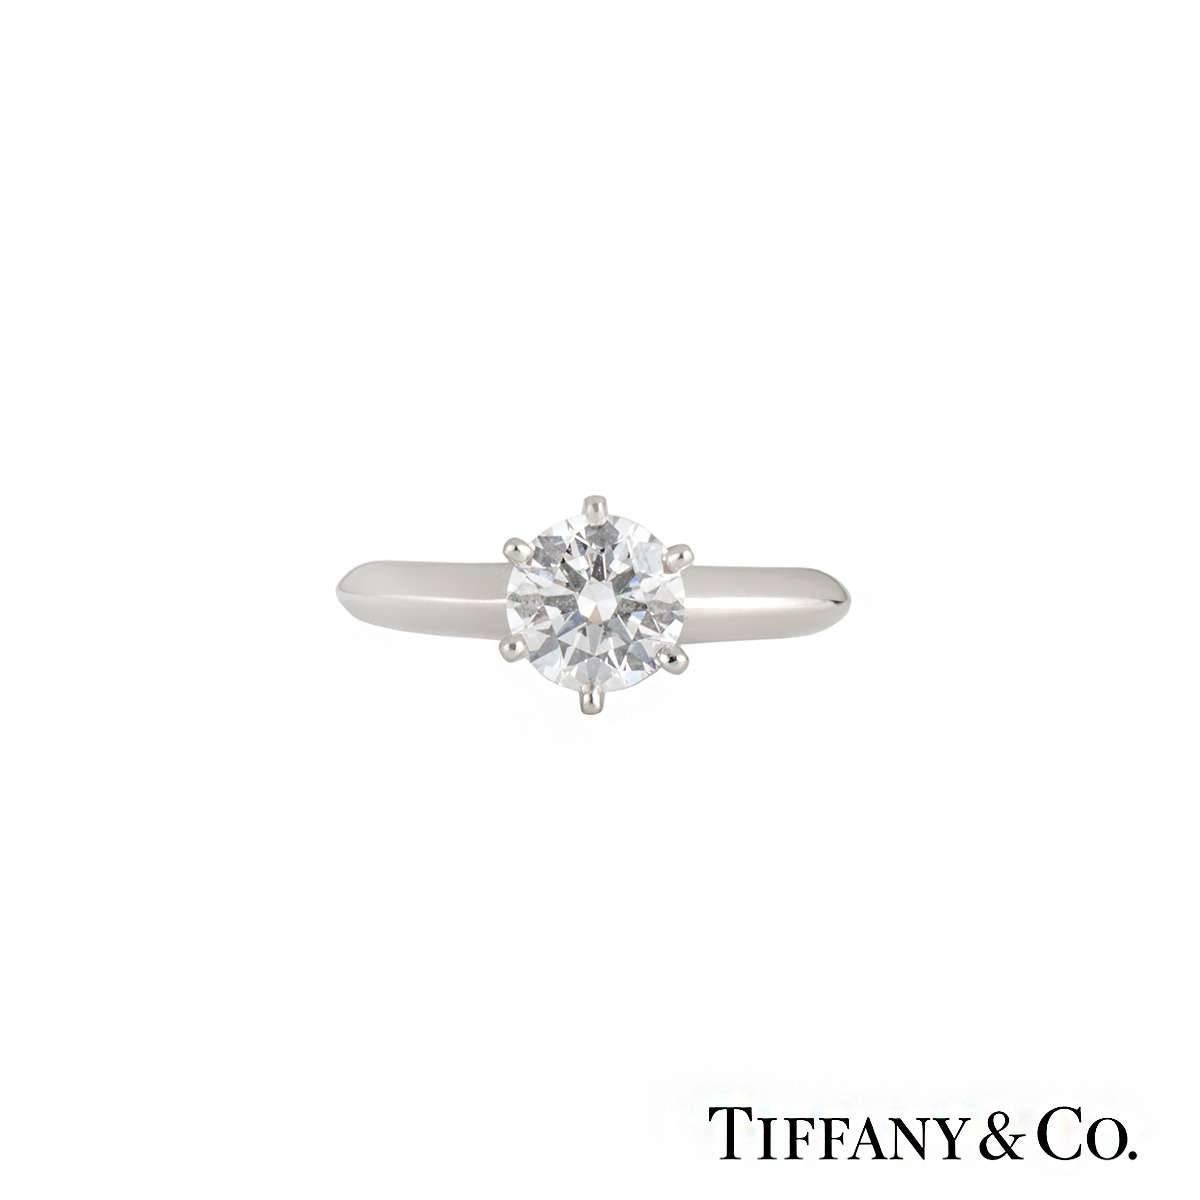 A beautiful single solitaire diamond ring by Tiffany & Co in platinum. The ring has a 6 claw setting to the centre with a round brilliant cut diamond weighing 1.07ct, F in colour and VVS2 in clarity, with a classic Tiffany knife edge setting.